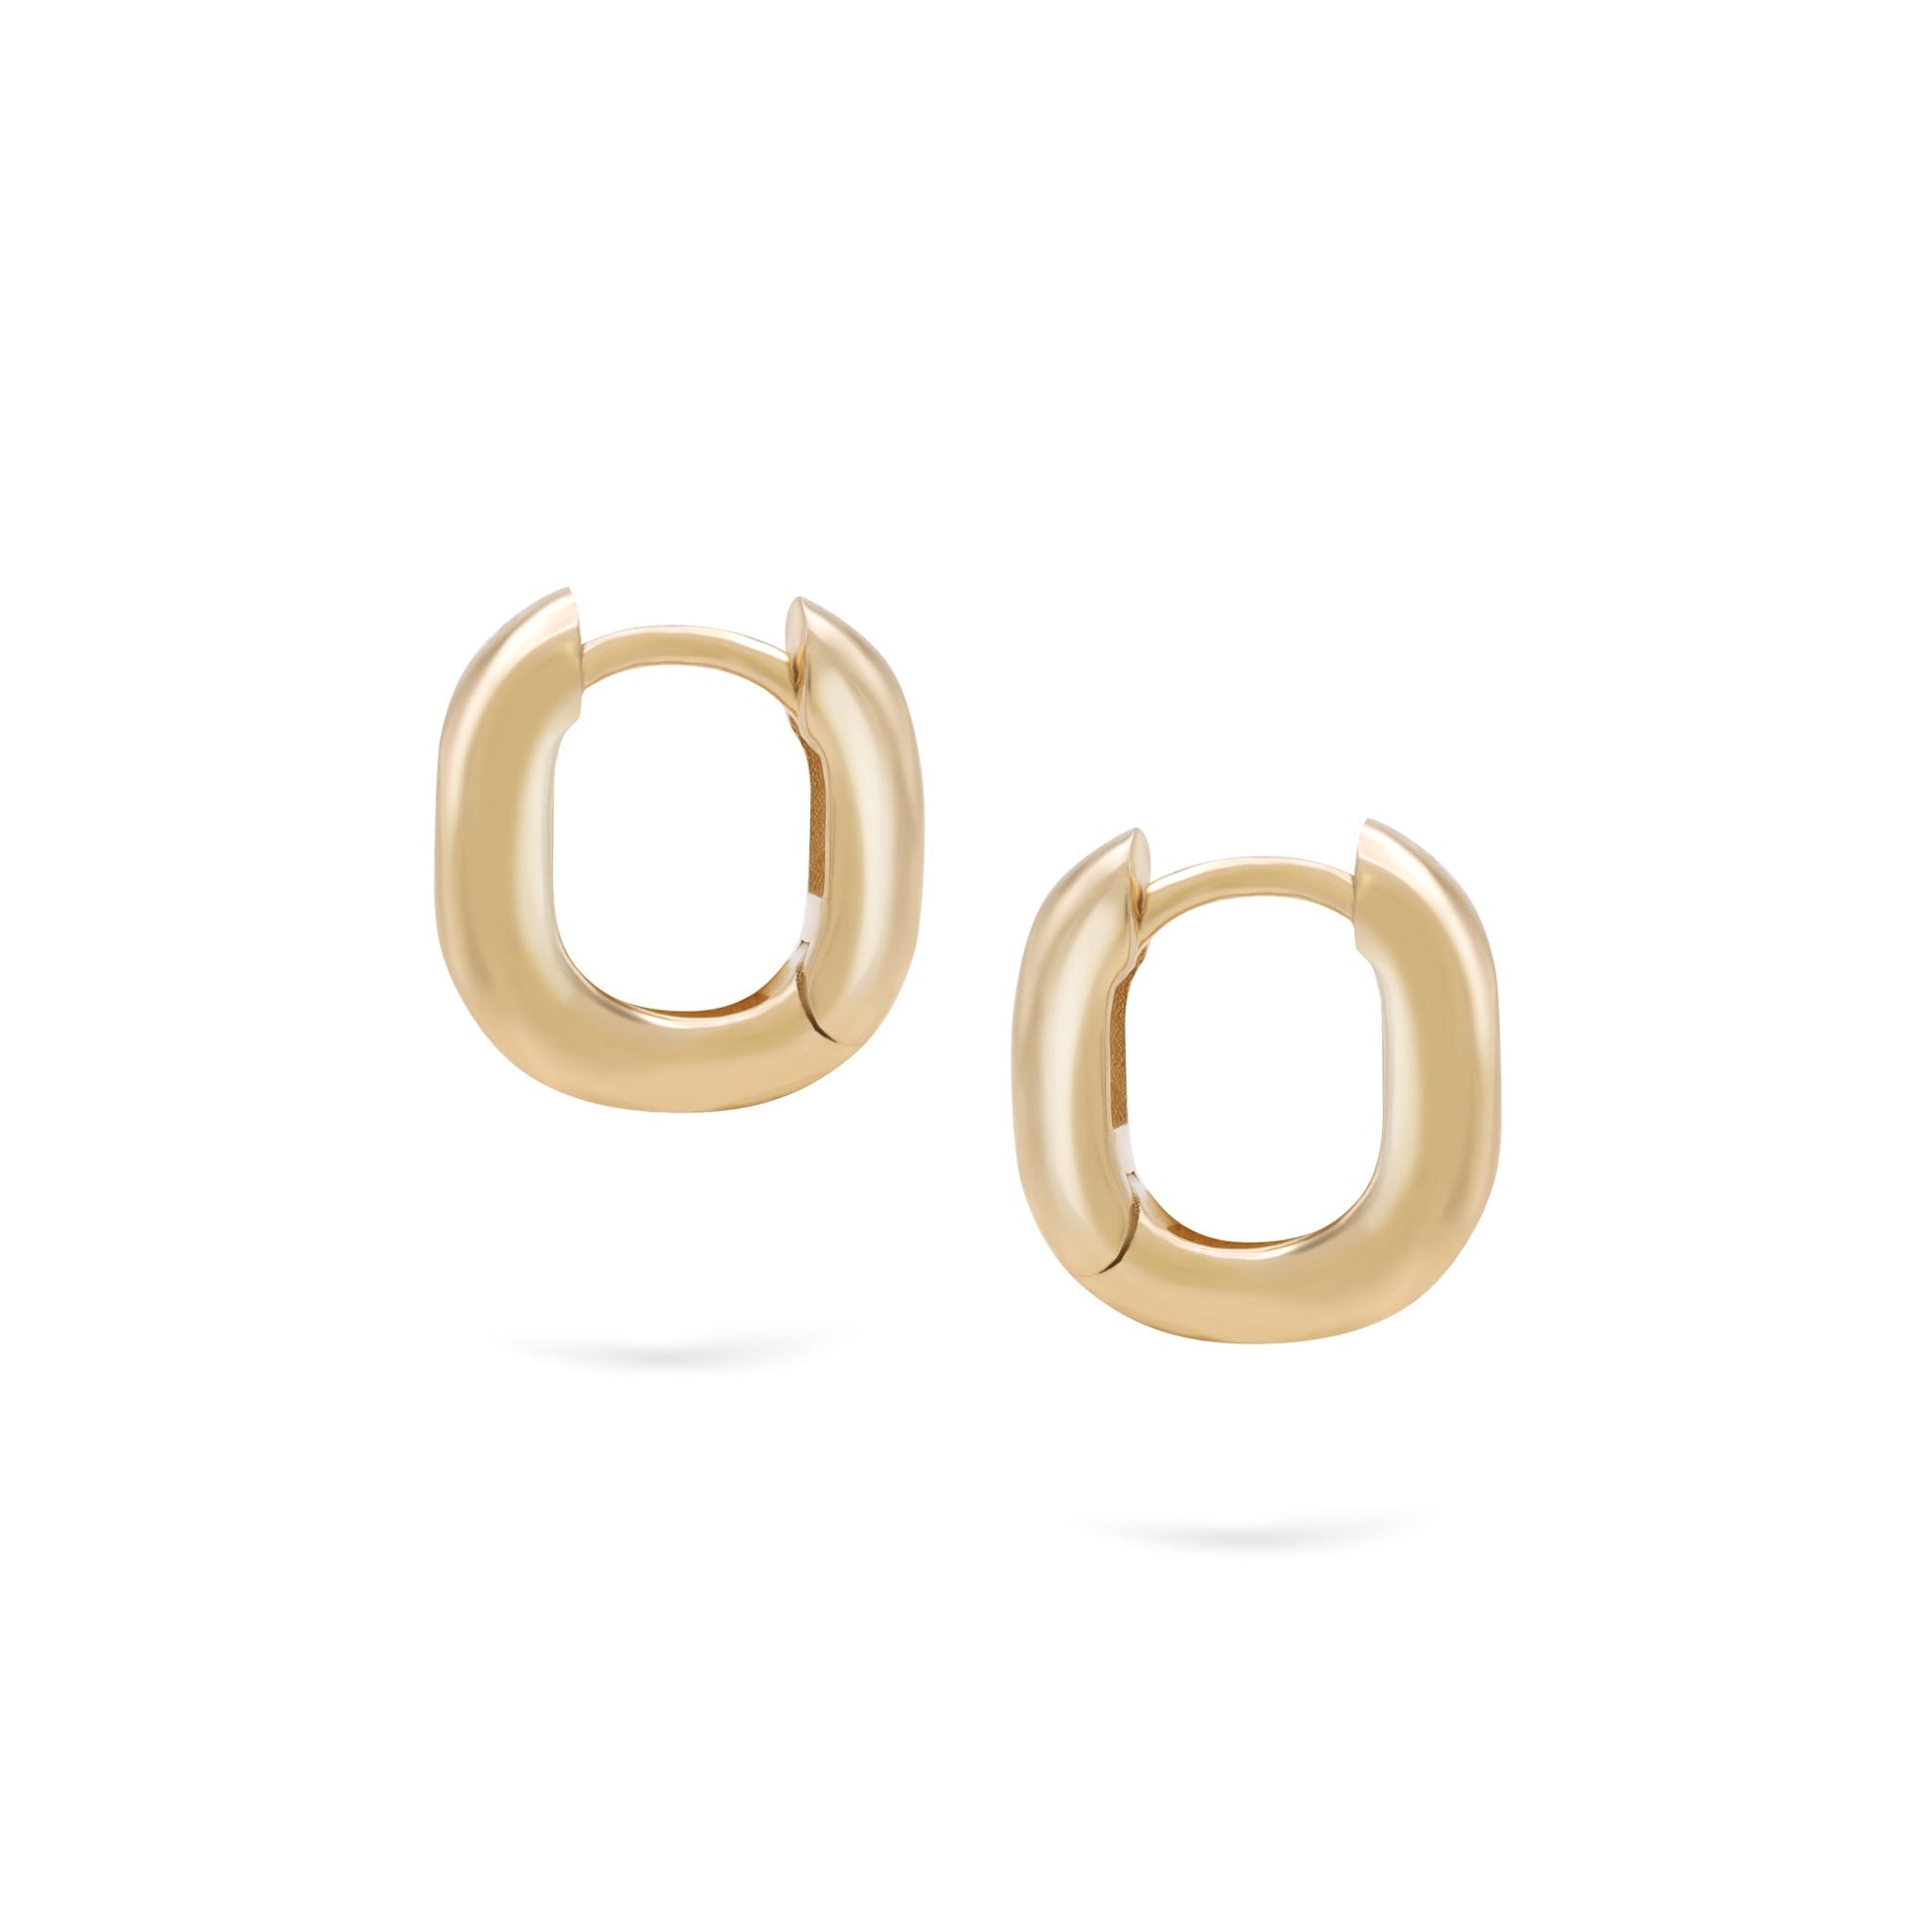 Jewelry Curved Goldens Hoops | Small Gold Earrings | 14K - Yellow / Pair - earrings Zengoda Shop online from